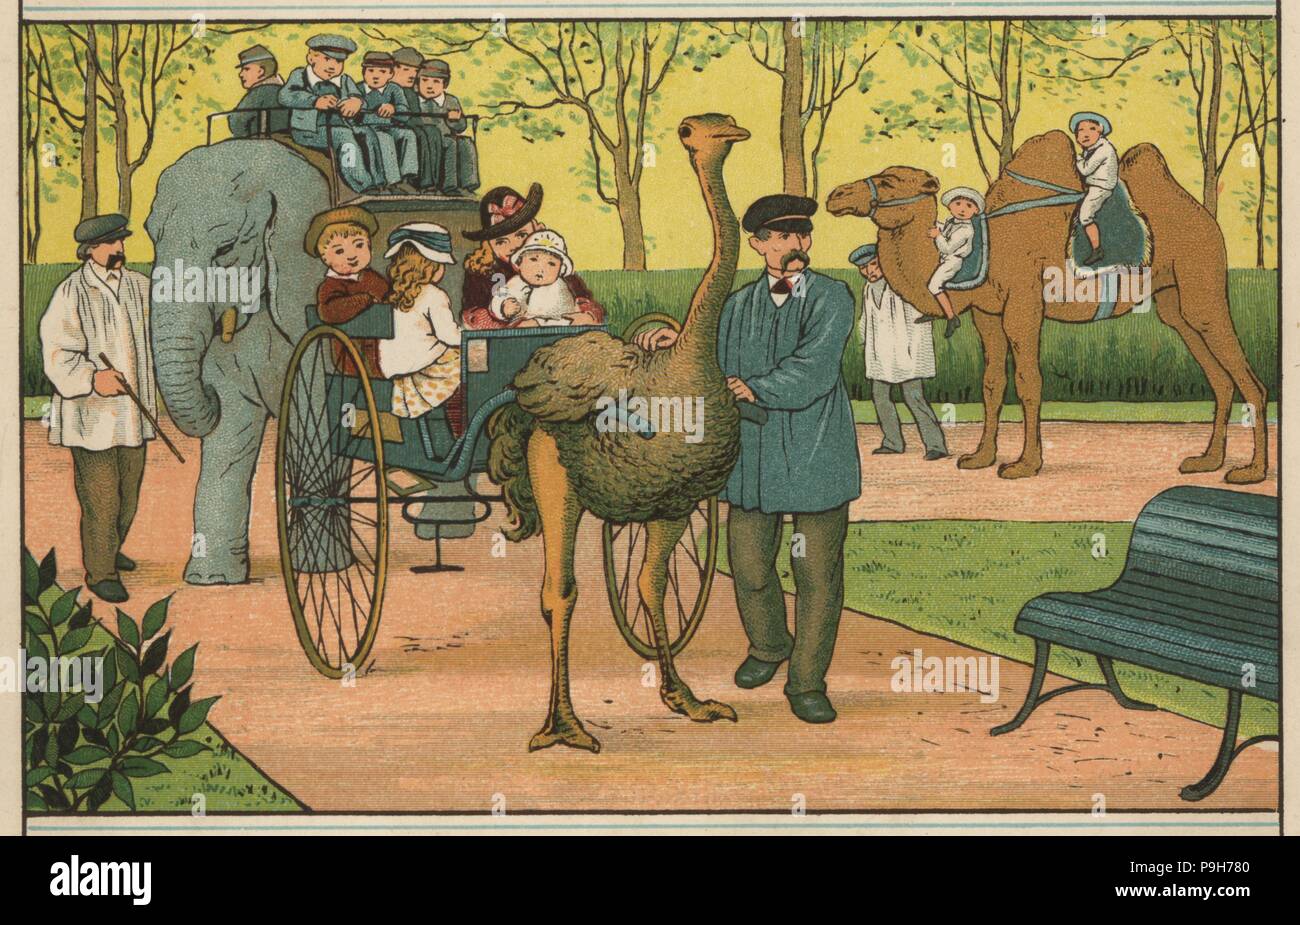 Children riding on Mumbo the elephant in the Jardin D'acclimatation, Lac du  Jardin a la Porte Maillot, Paris. Others riding a dromedary camel and  ostrich. Colour woodblock after an illustration by Thomas